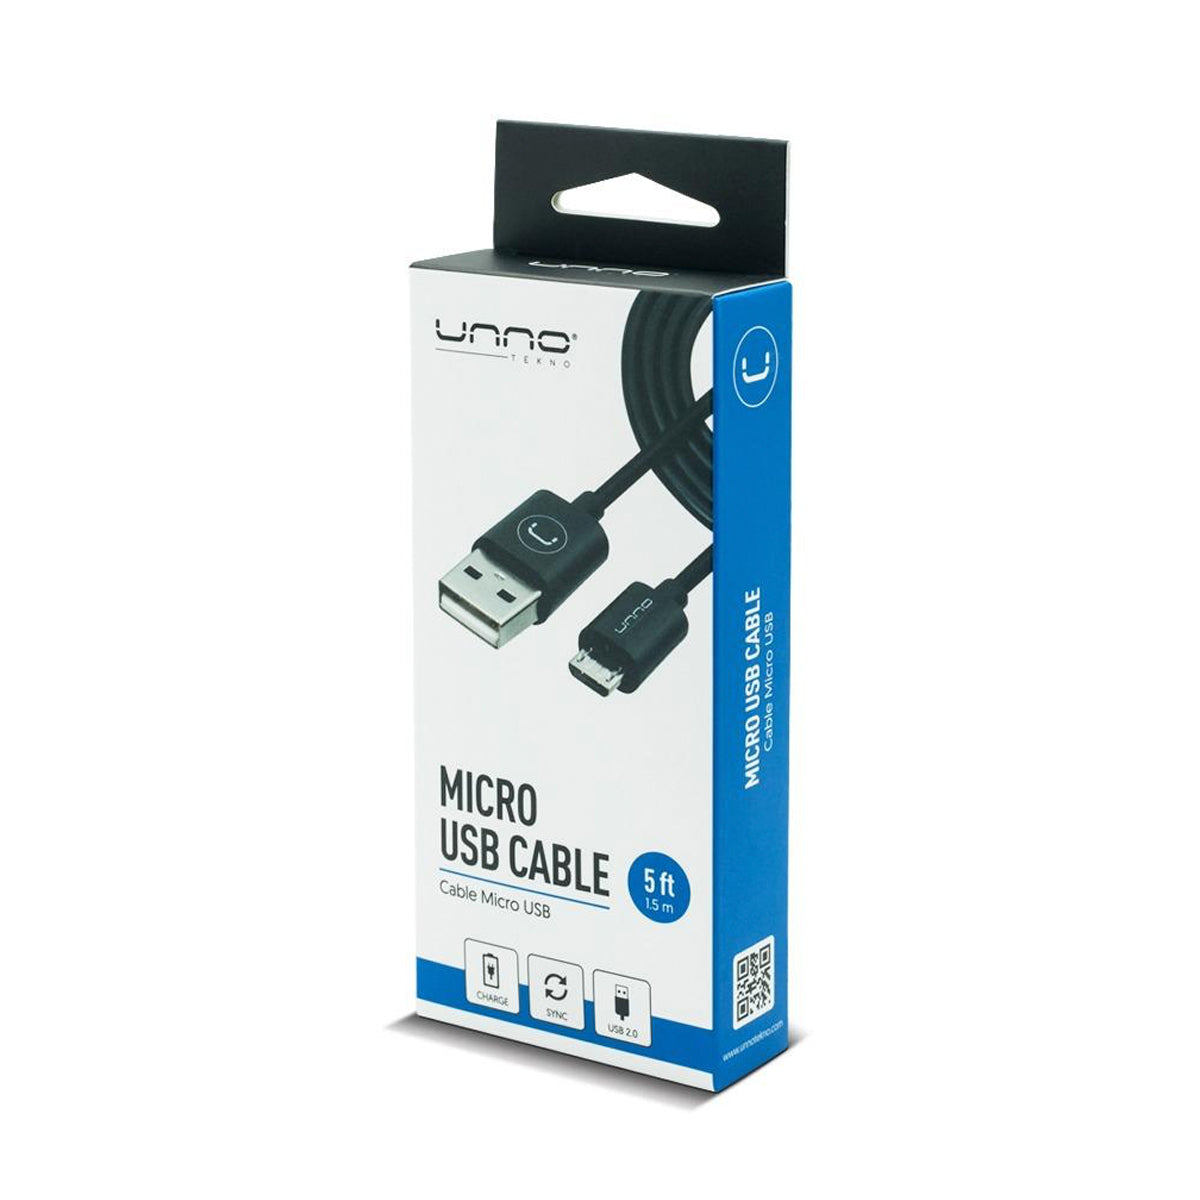 Cable MicroUSB 2.0 1.5M Unno